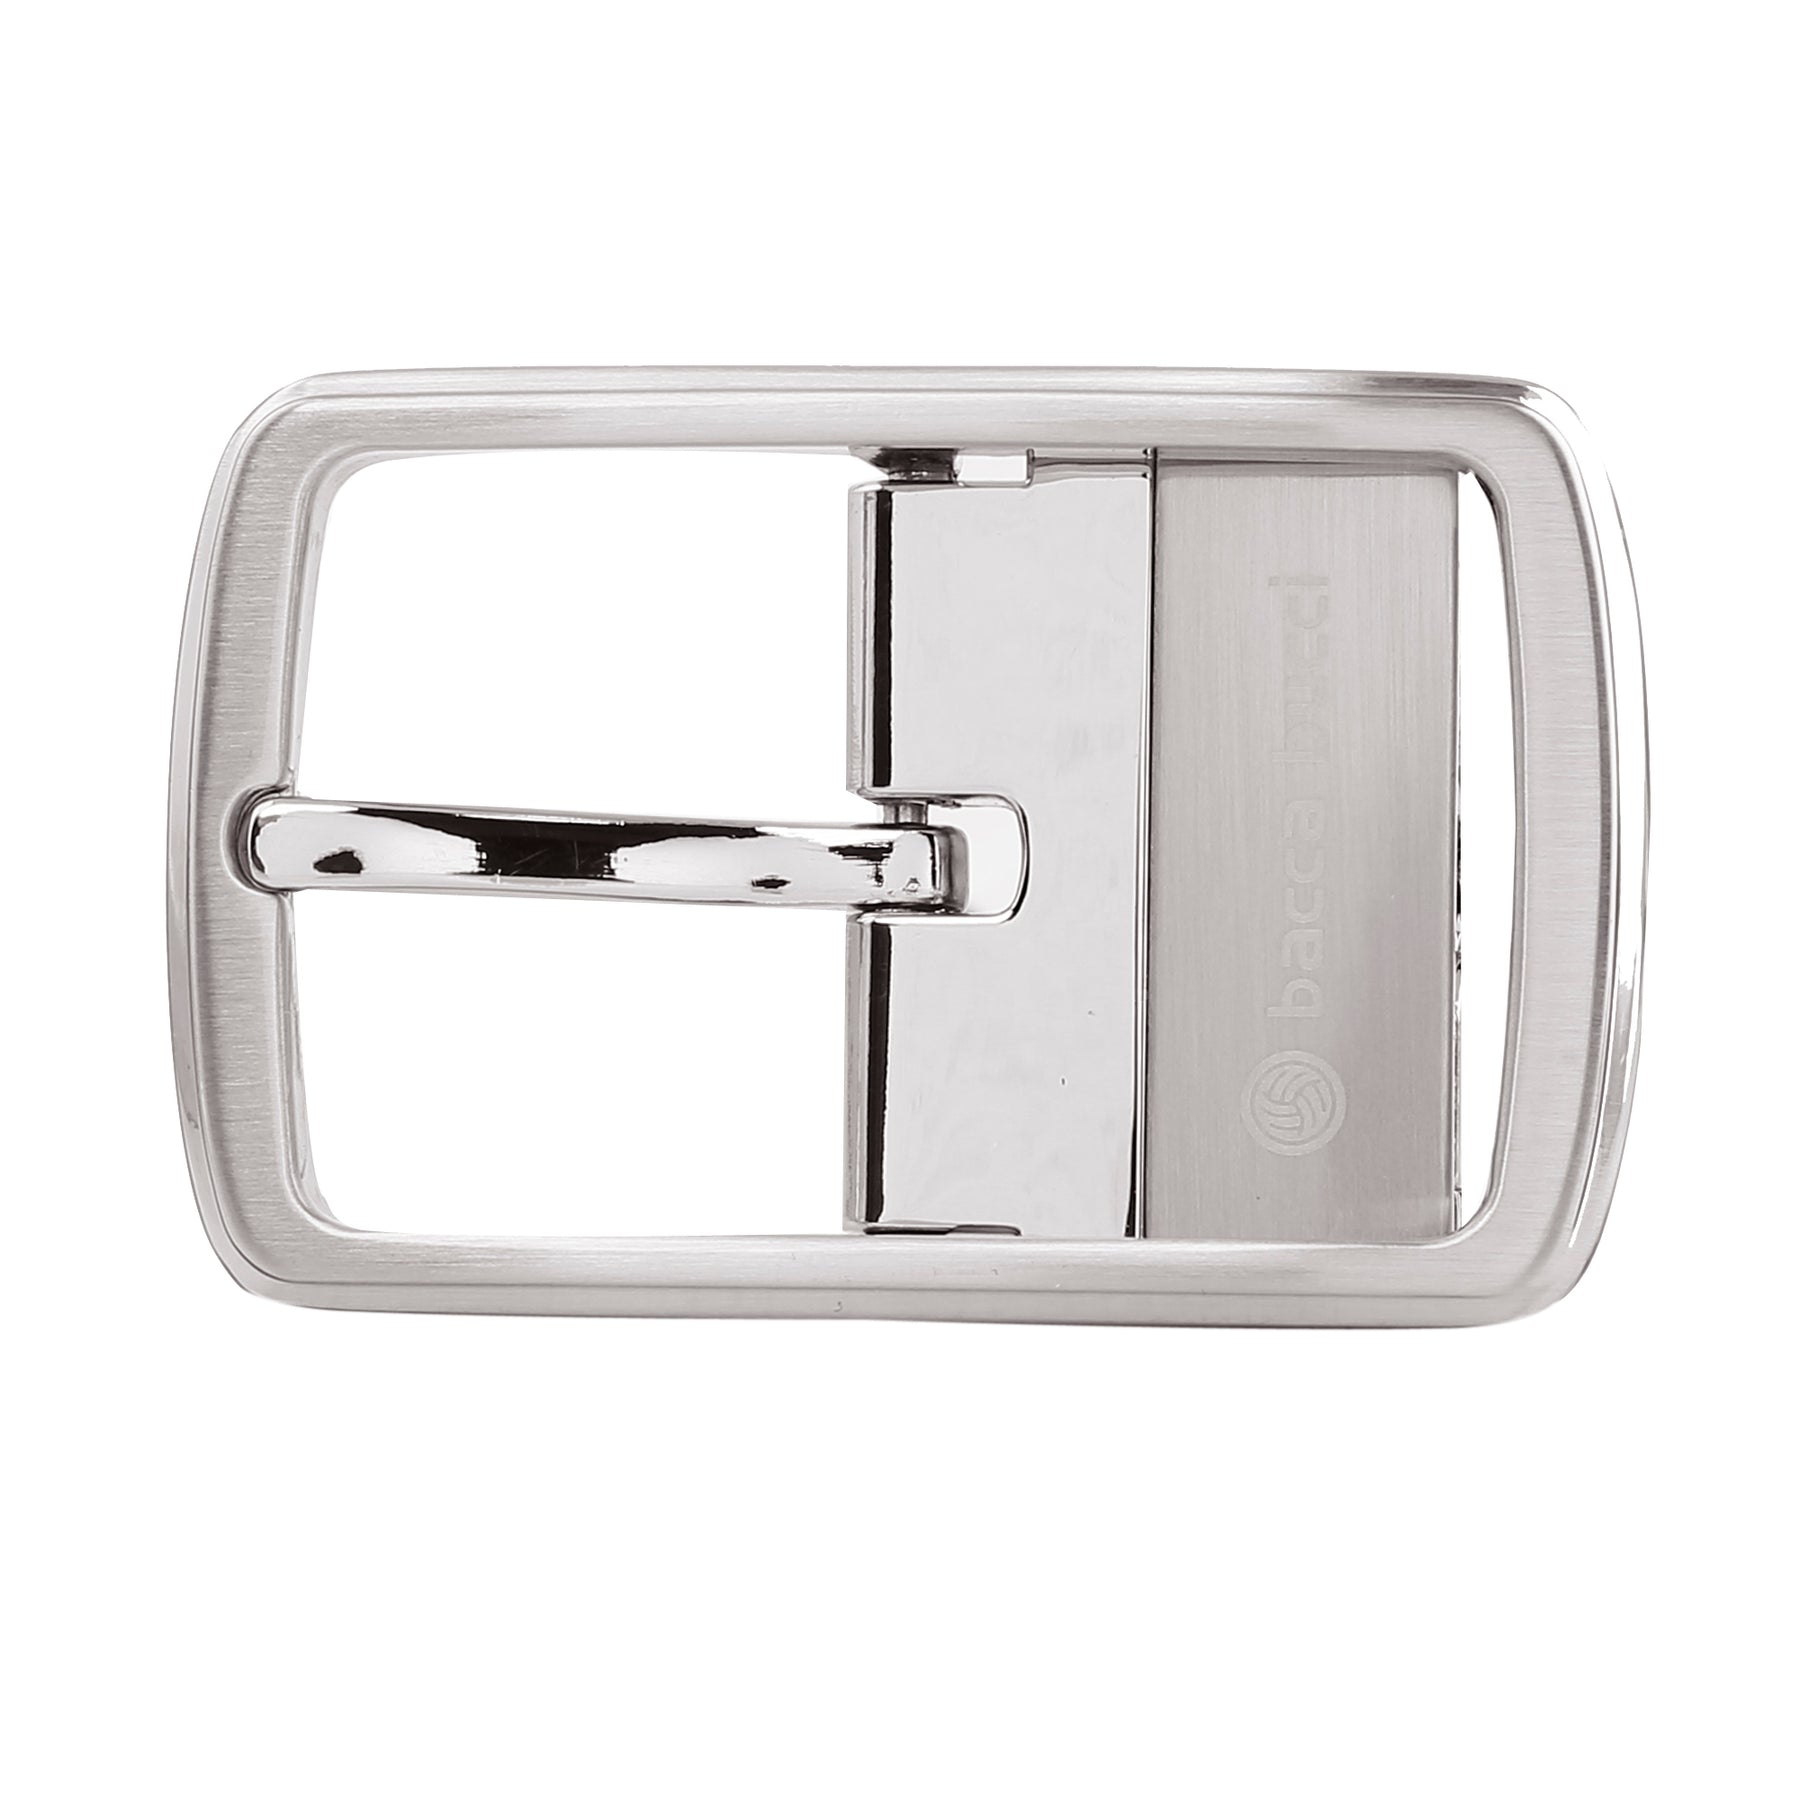 Bacca Bucci 35 MM Reversible Clamp Belt Buckle (Buckle only)